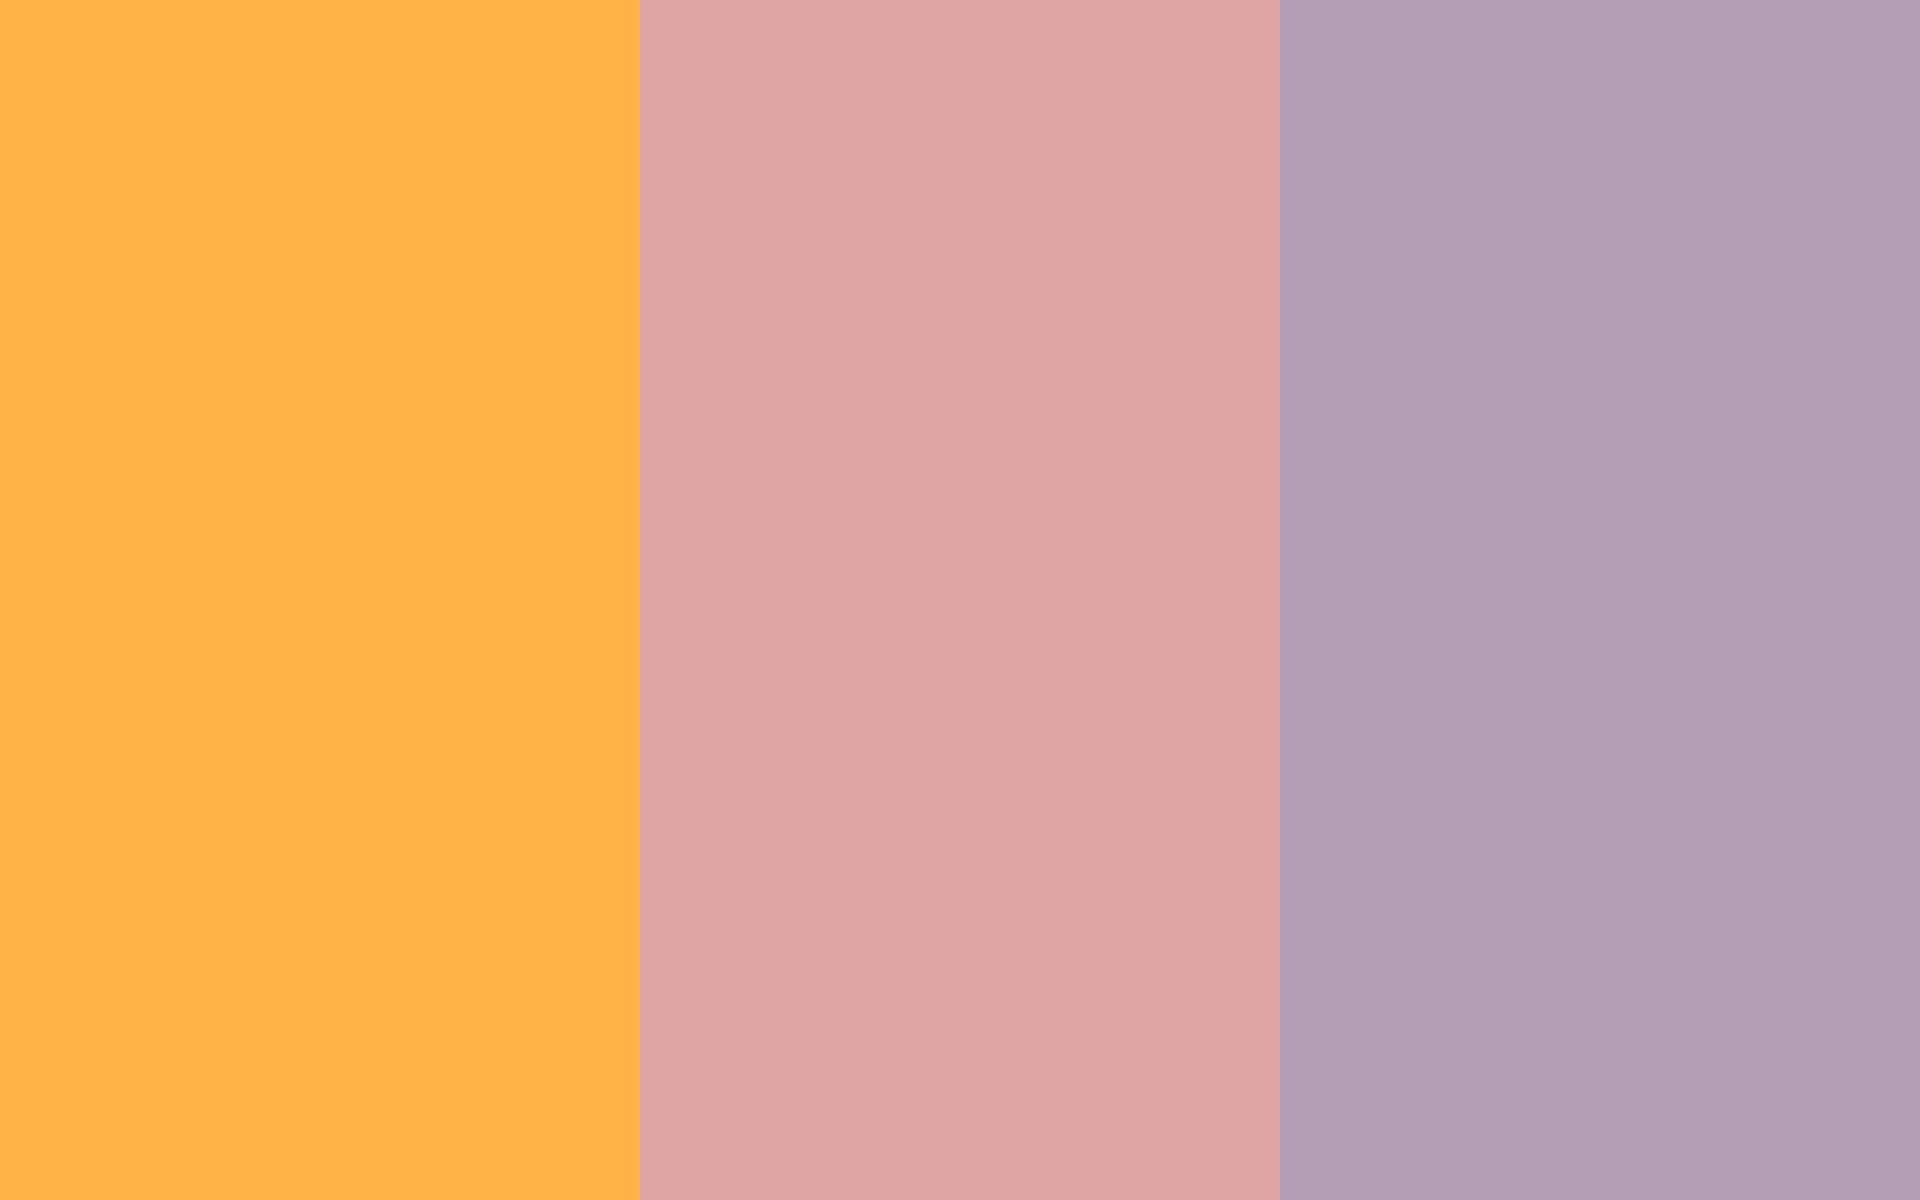 1920x1200 Orange, Pastel Pink and Pastel Purple solid three color background .